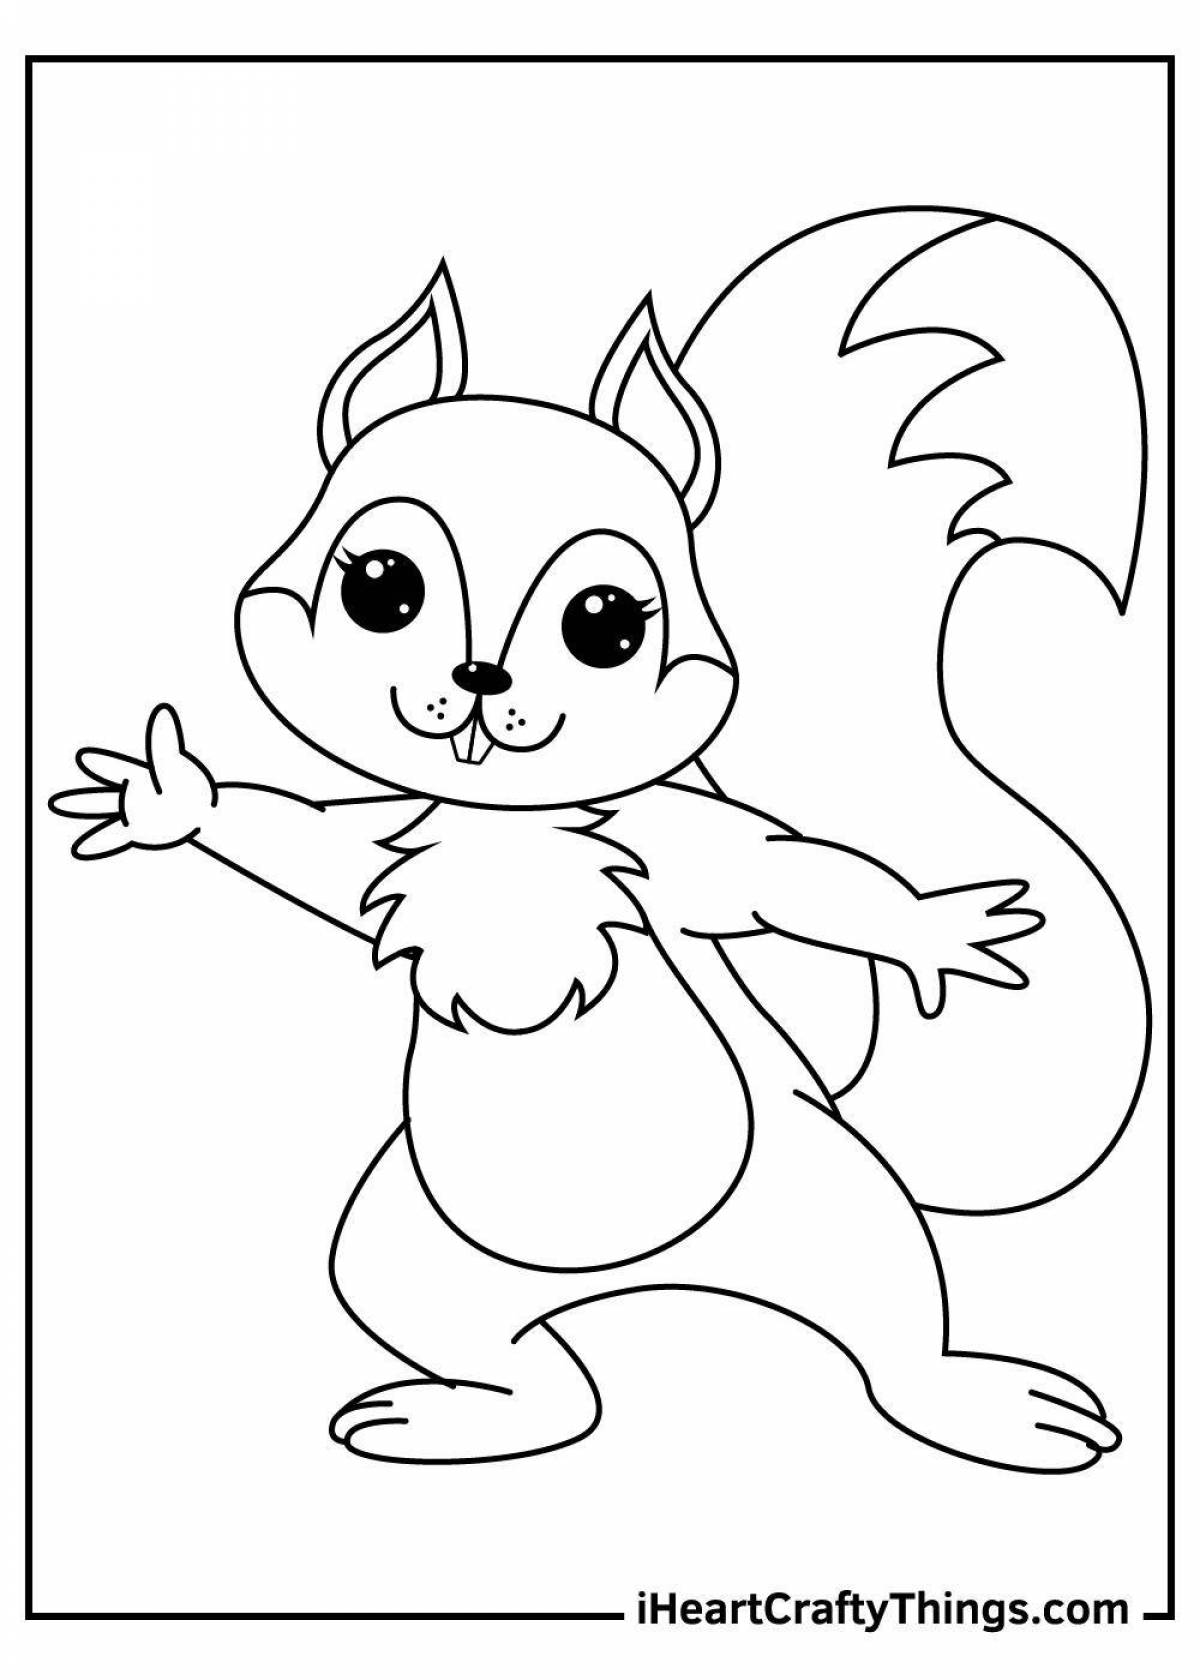 Squirrel coloring book for children 6-7 years old